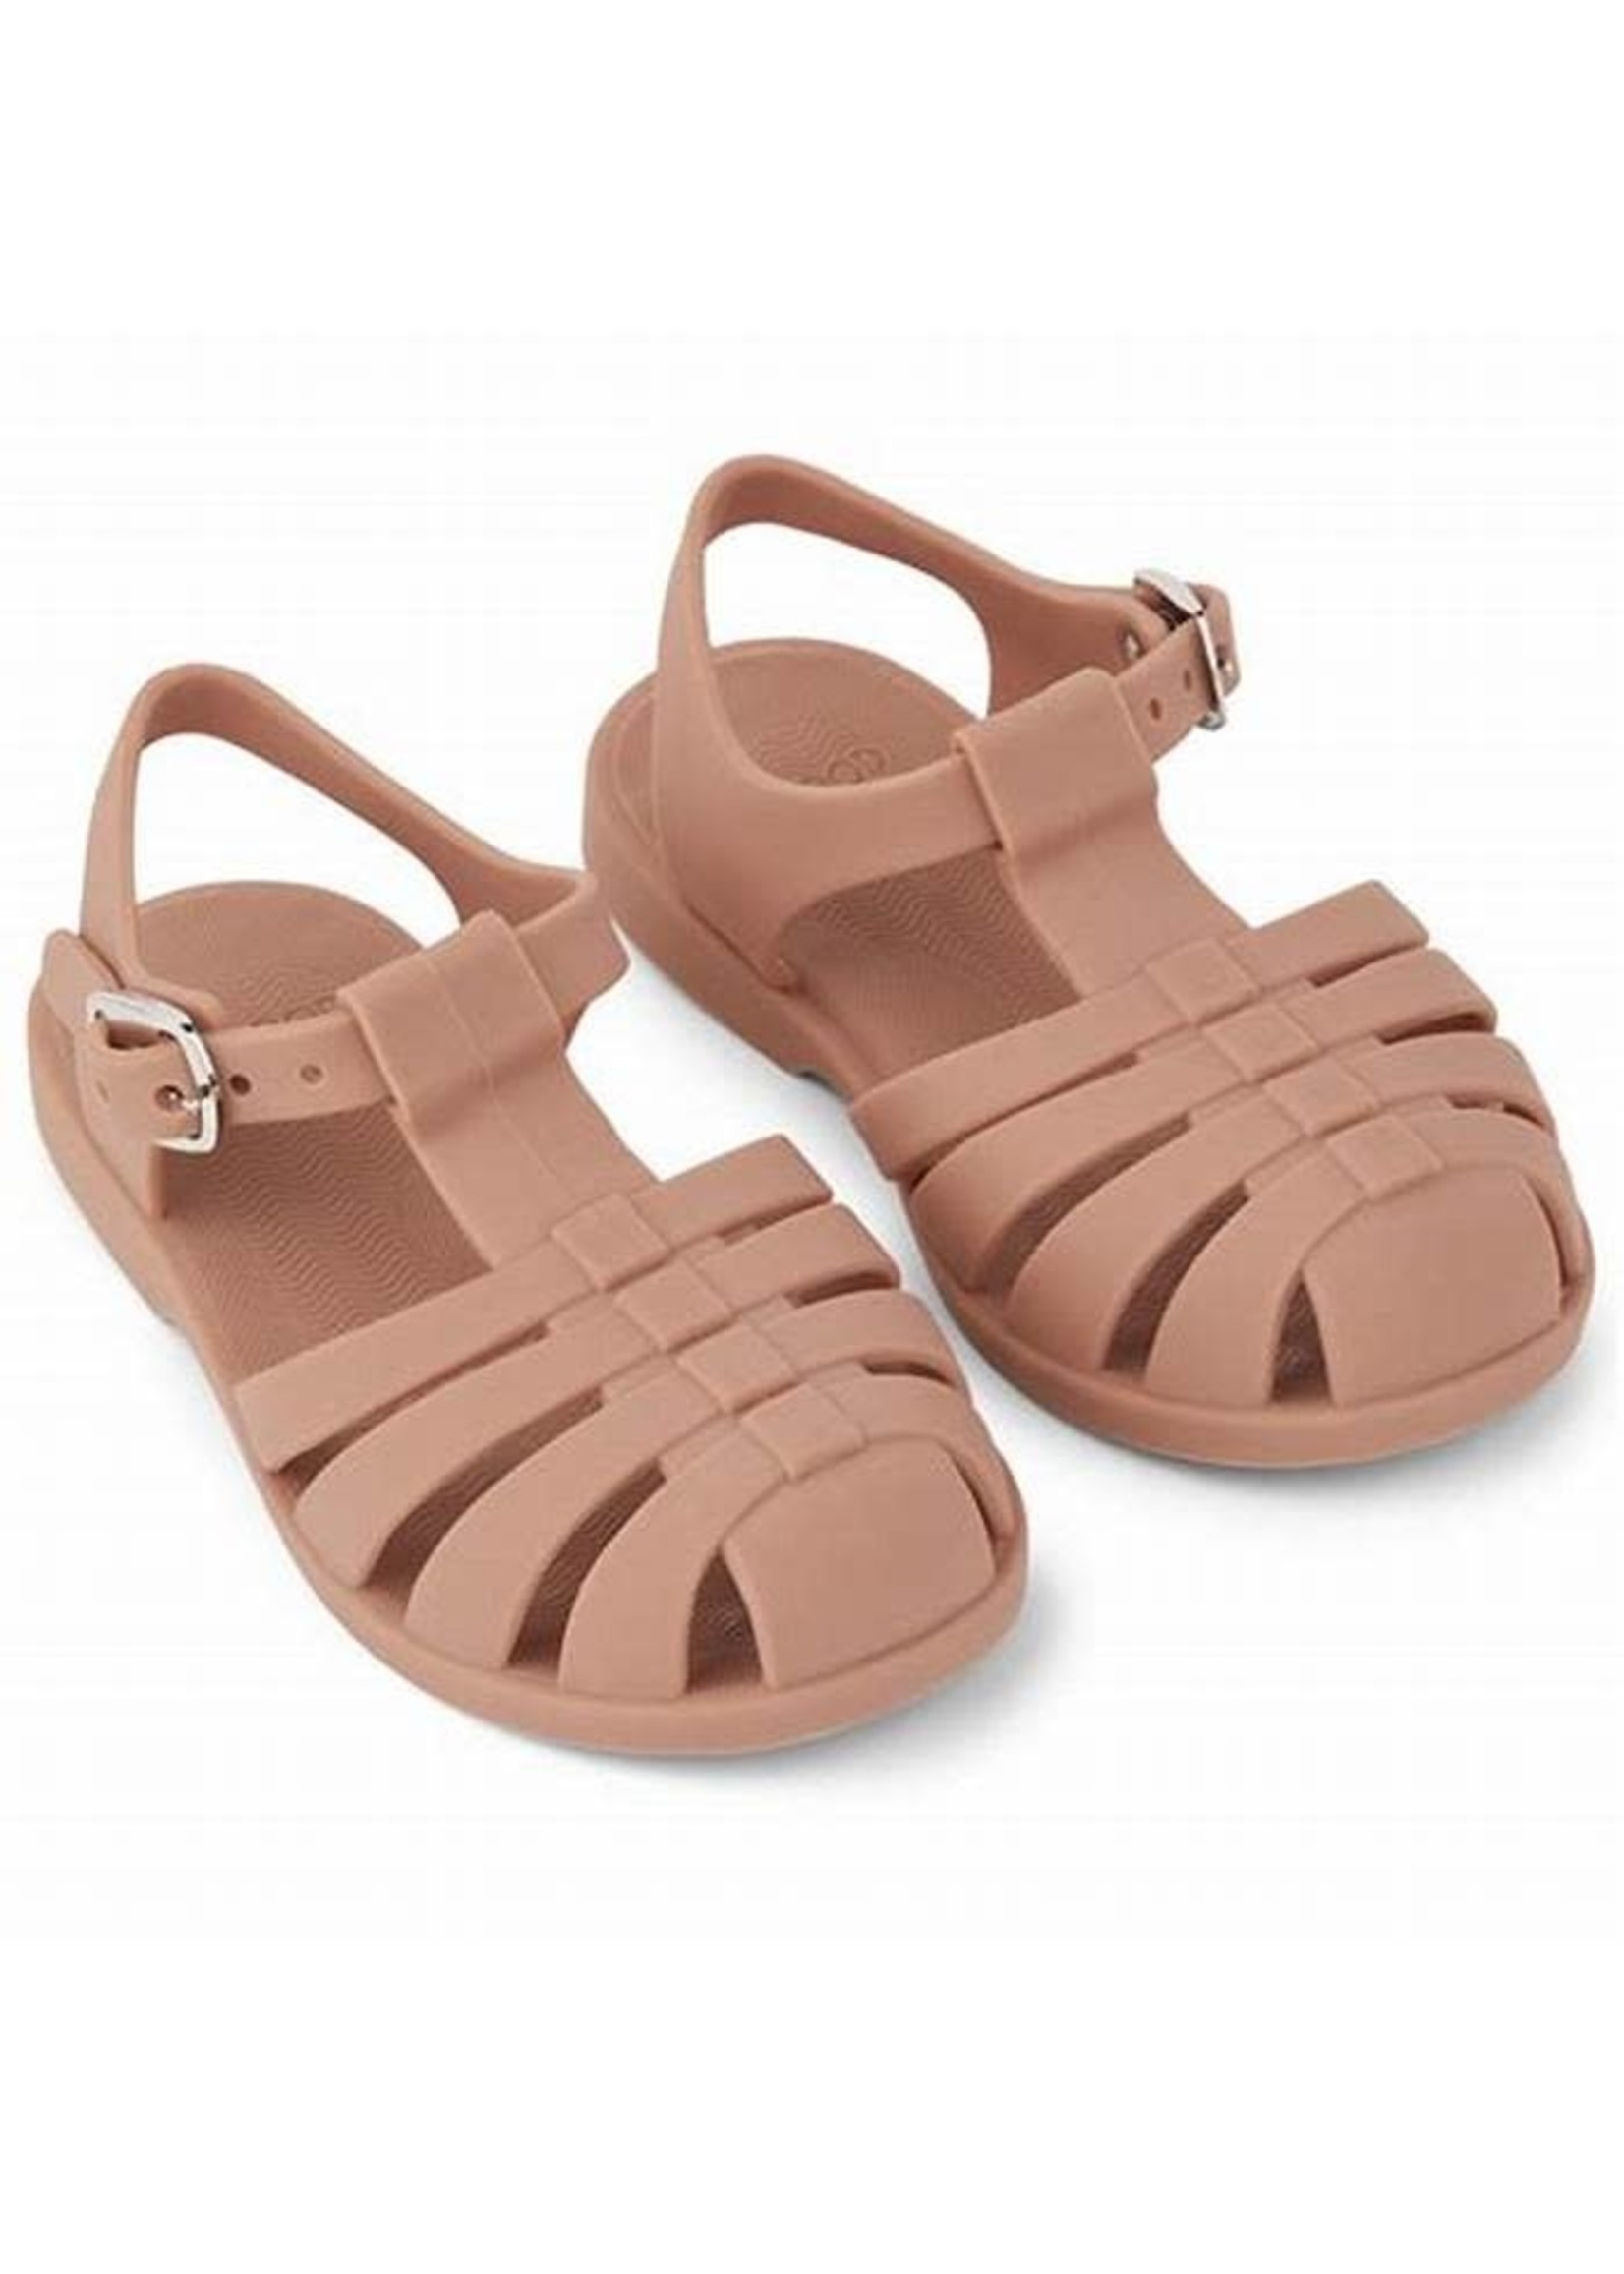 Liewood Bre Sandals Tuscany rose